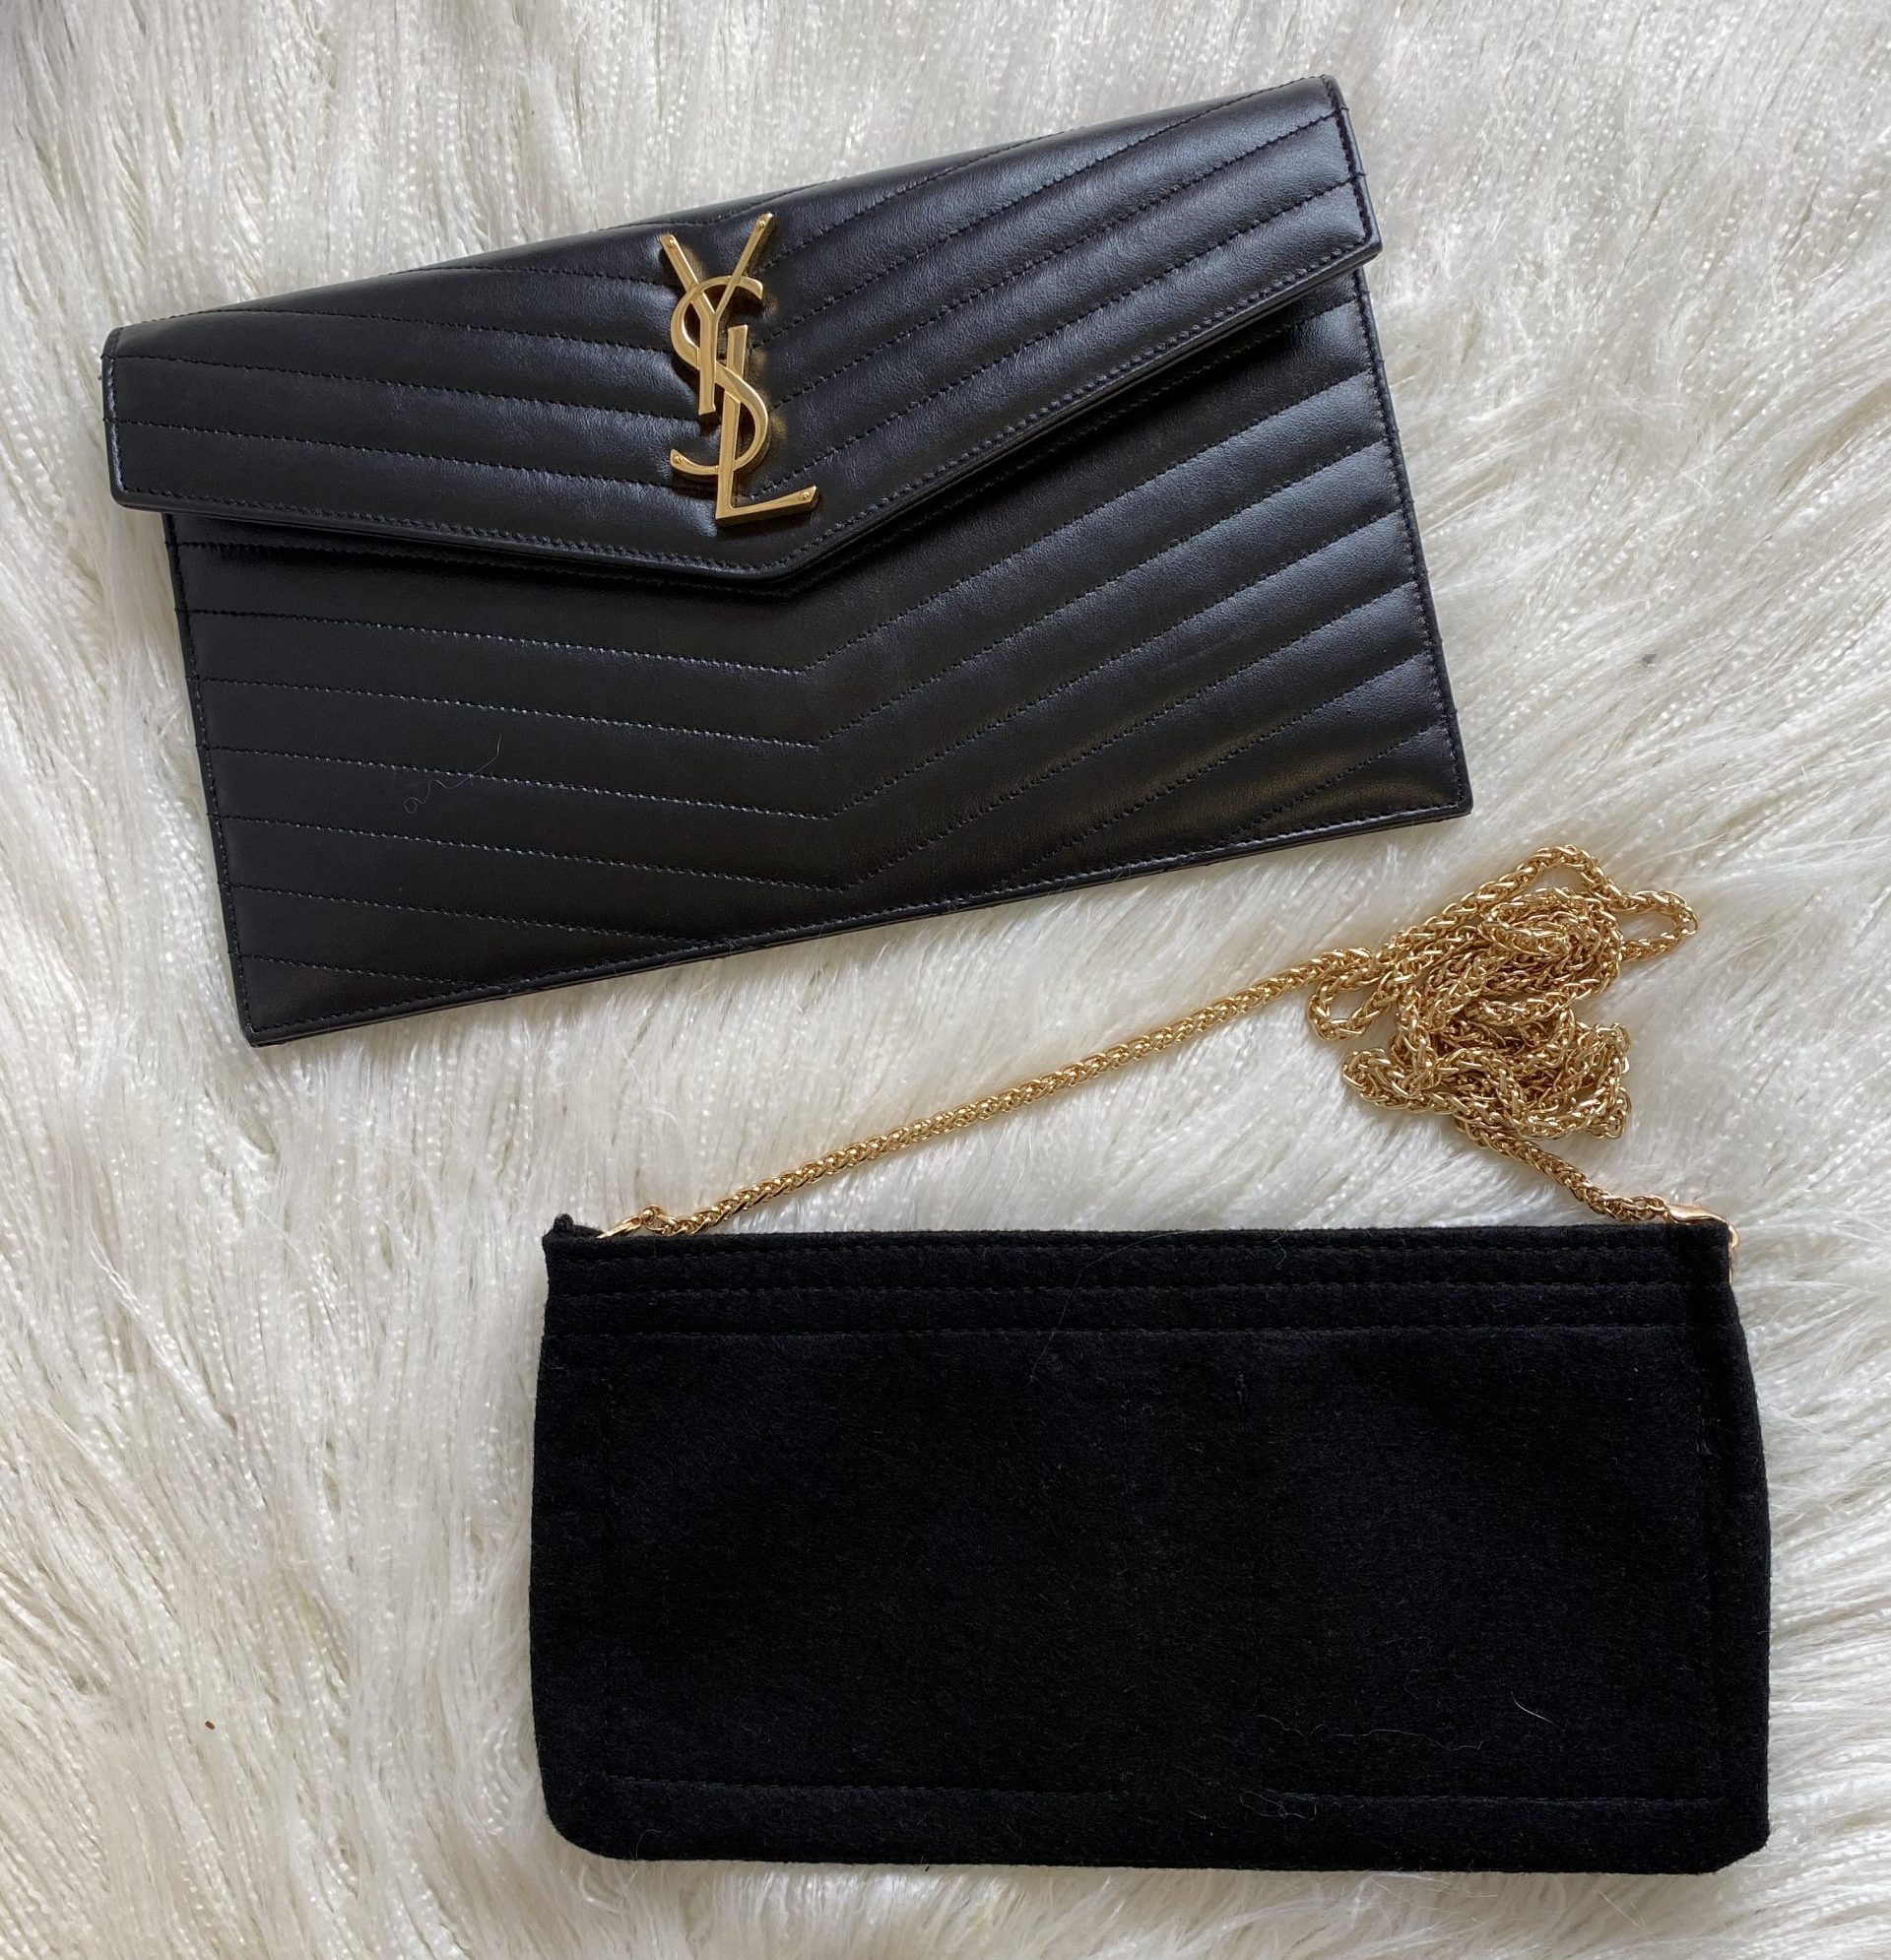 I love a good hack. 🤭 Converting my YSL Uptown Pouch into a purse